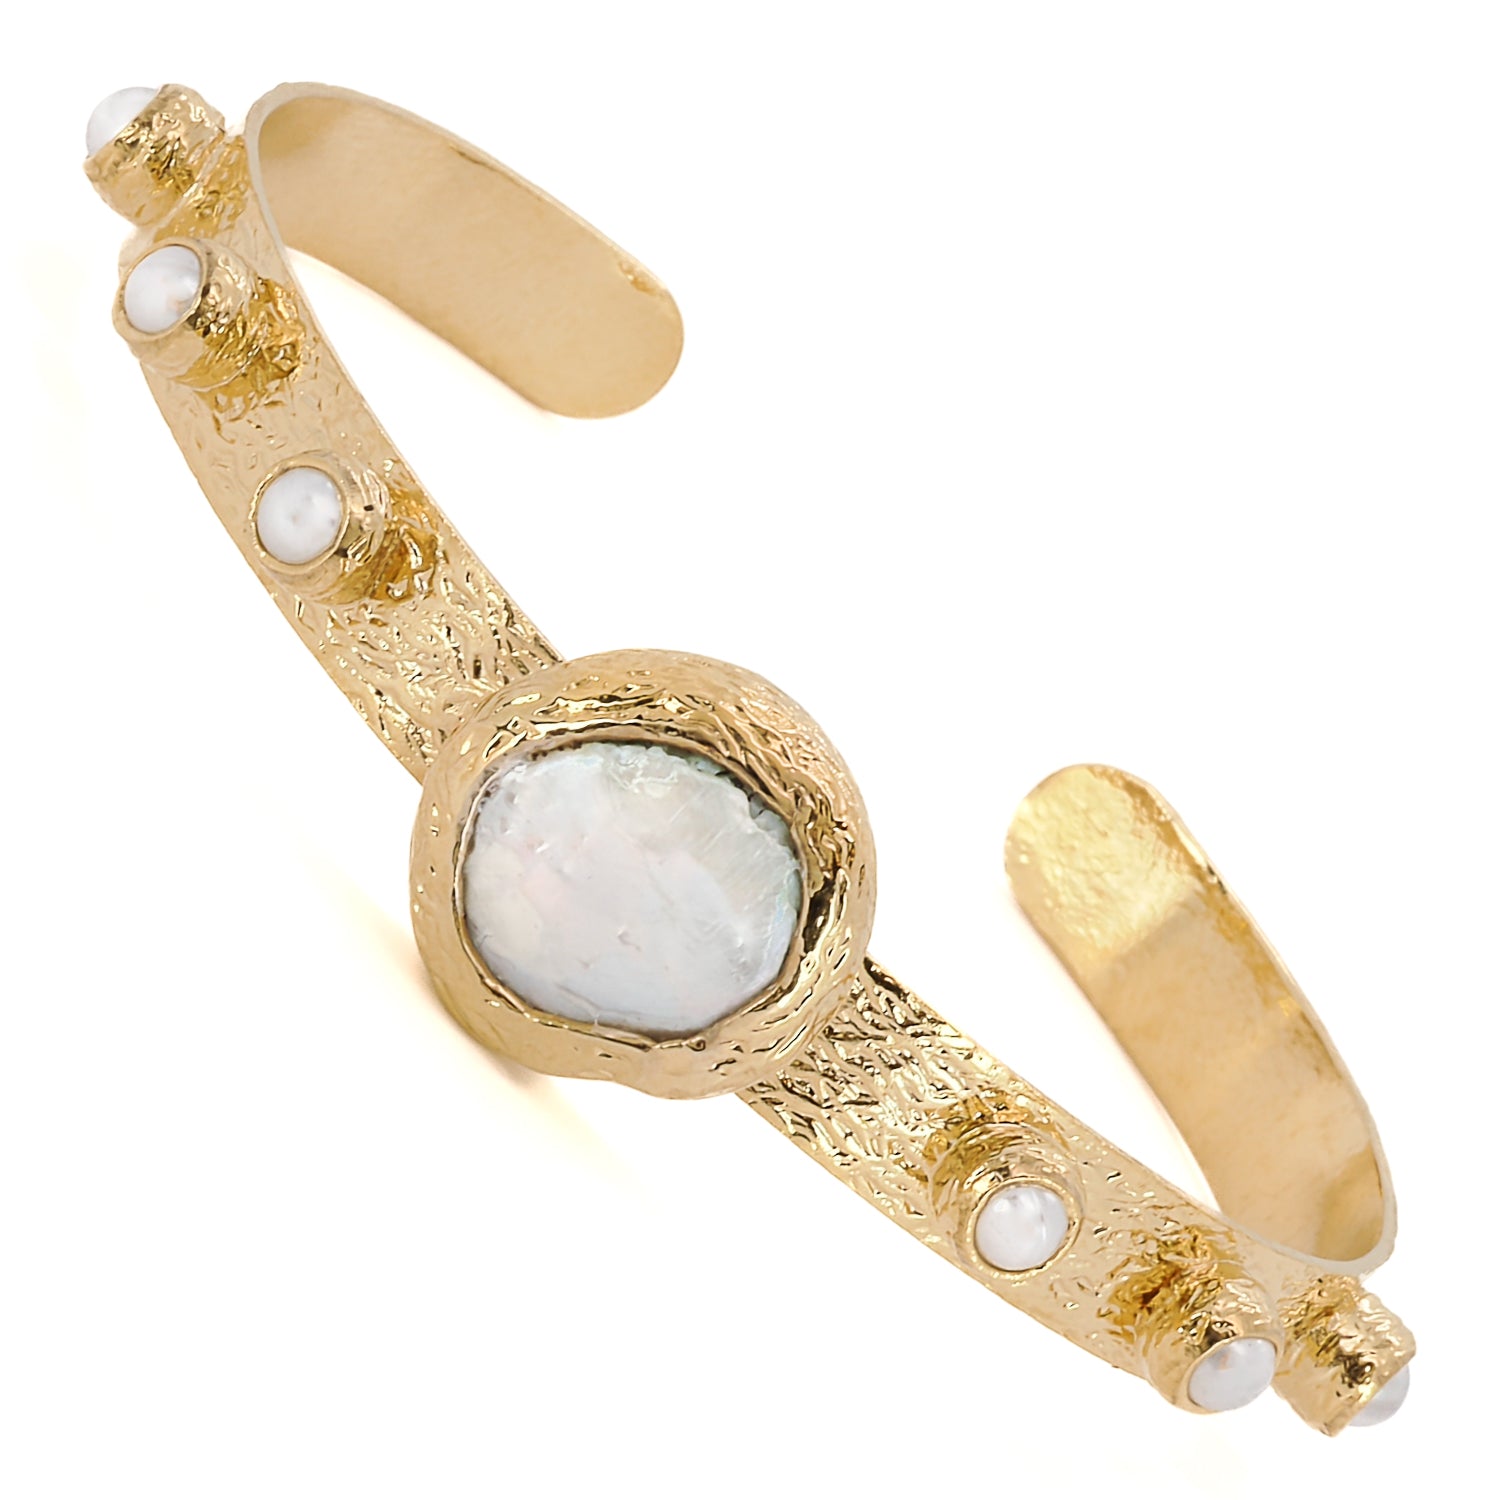 Captivating Cleopatra-inspired Gold & Pearl Cuff Bracelet.